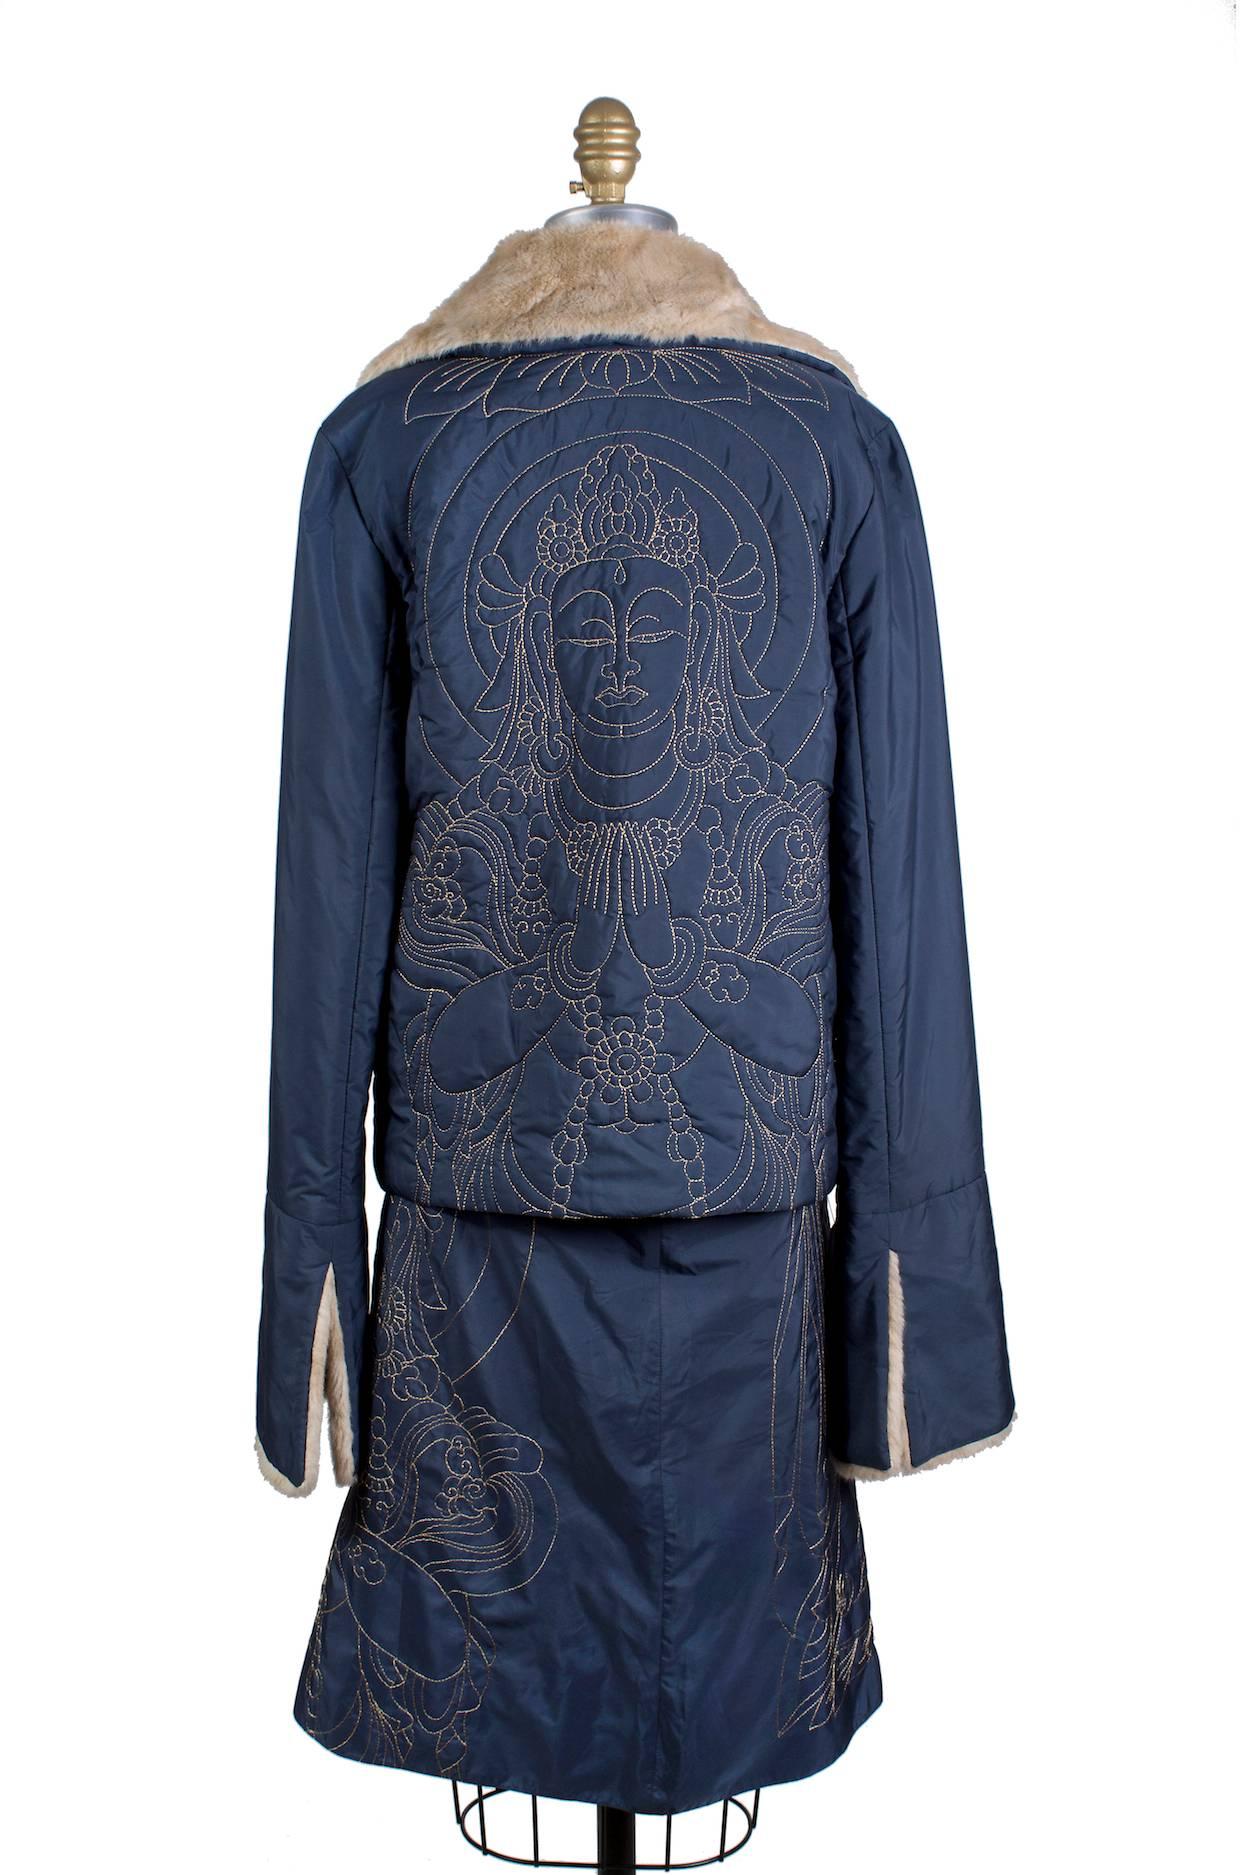 This is a skirt and jacket set by Vivienne Tam circa 1990s.  The jacket has a faux fur collar and cuffs and both pieces are embroidered to create a buddha motif.  Zipper closures for both pieces.

Skirt:
28